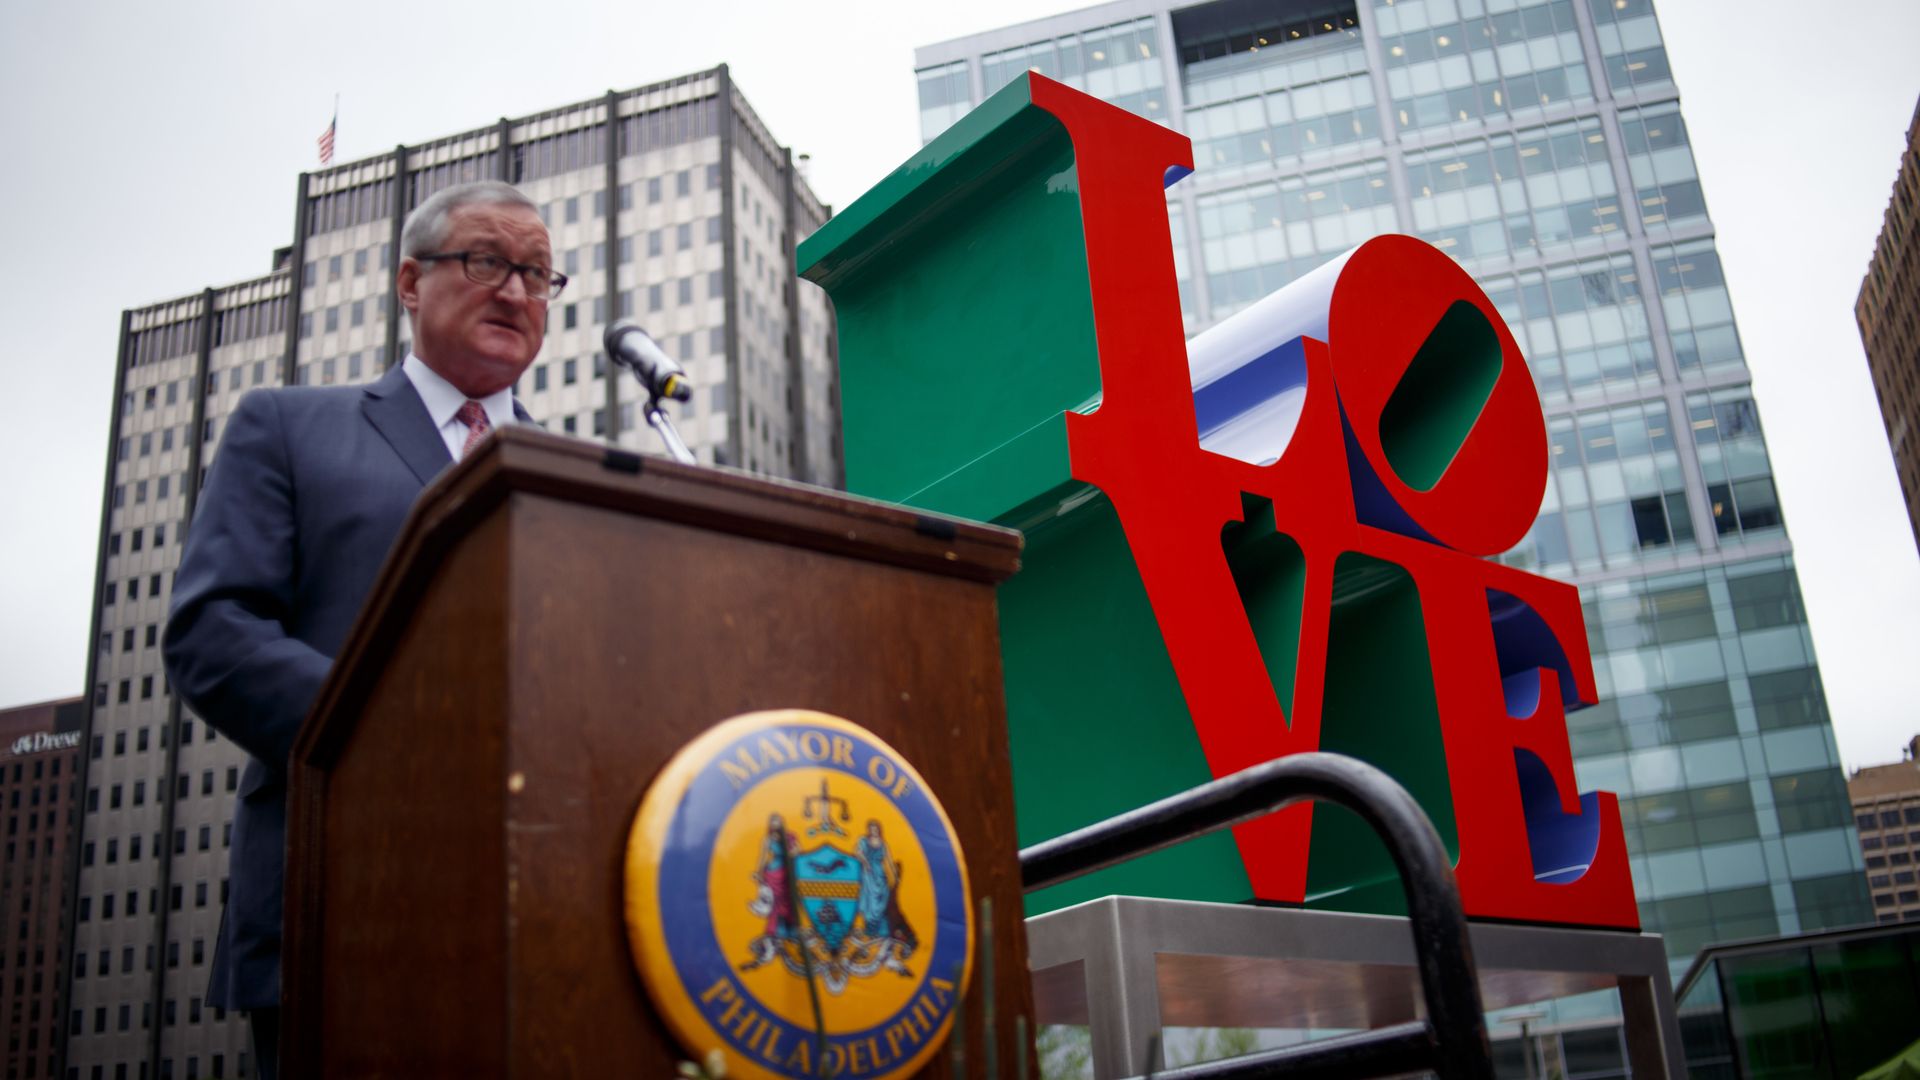 The Philadelphia mayor speaks at a podium with the red sculpture of "LOVE" in the background